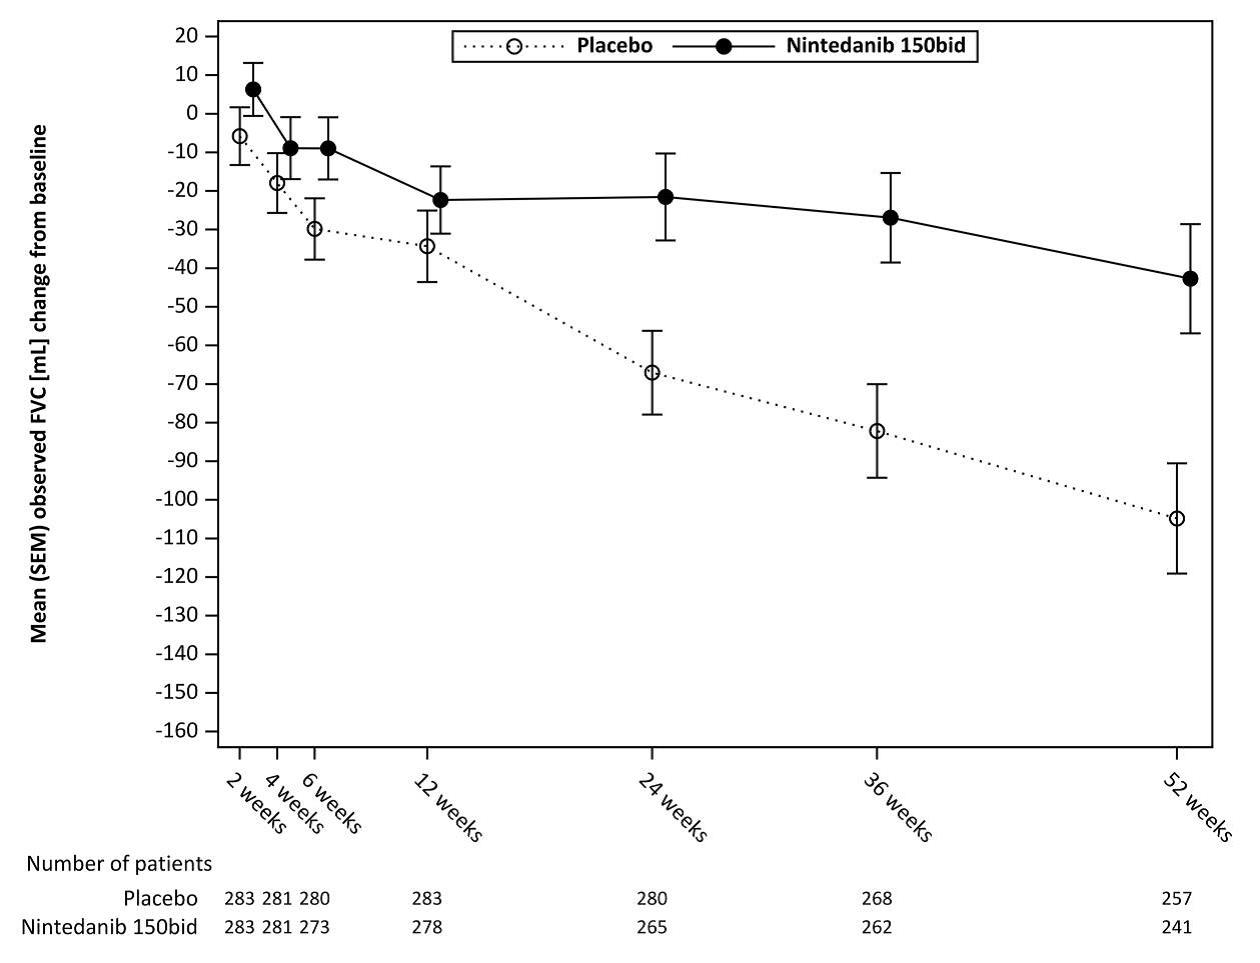 Mean Changes of FVC from baseline with nintedanib vs placebo over 52 weeks